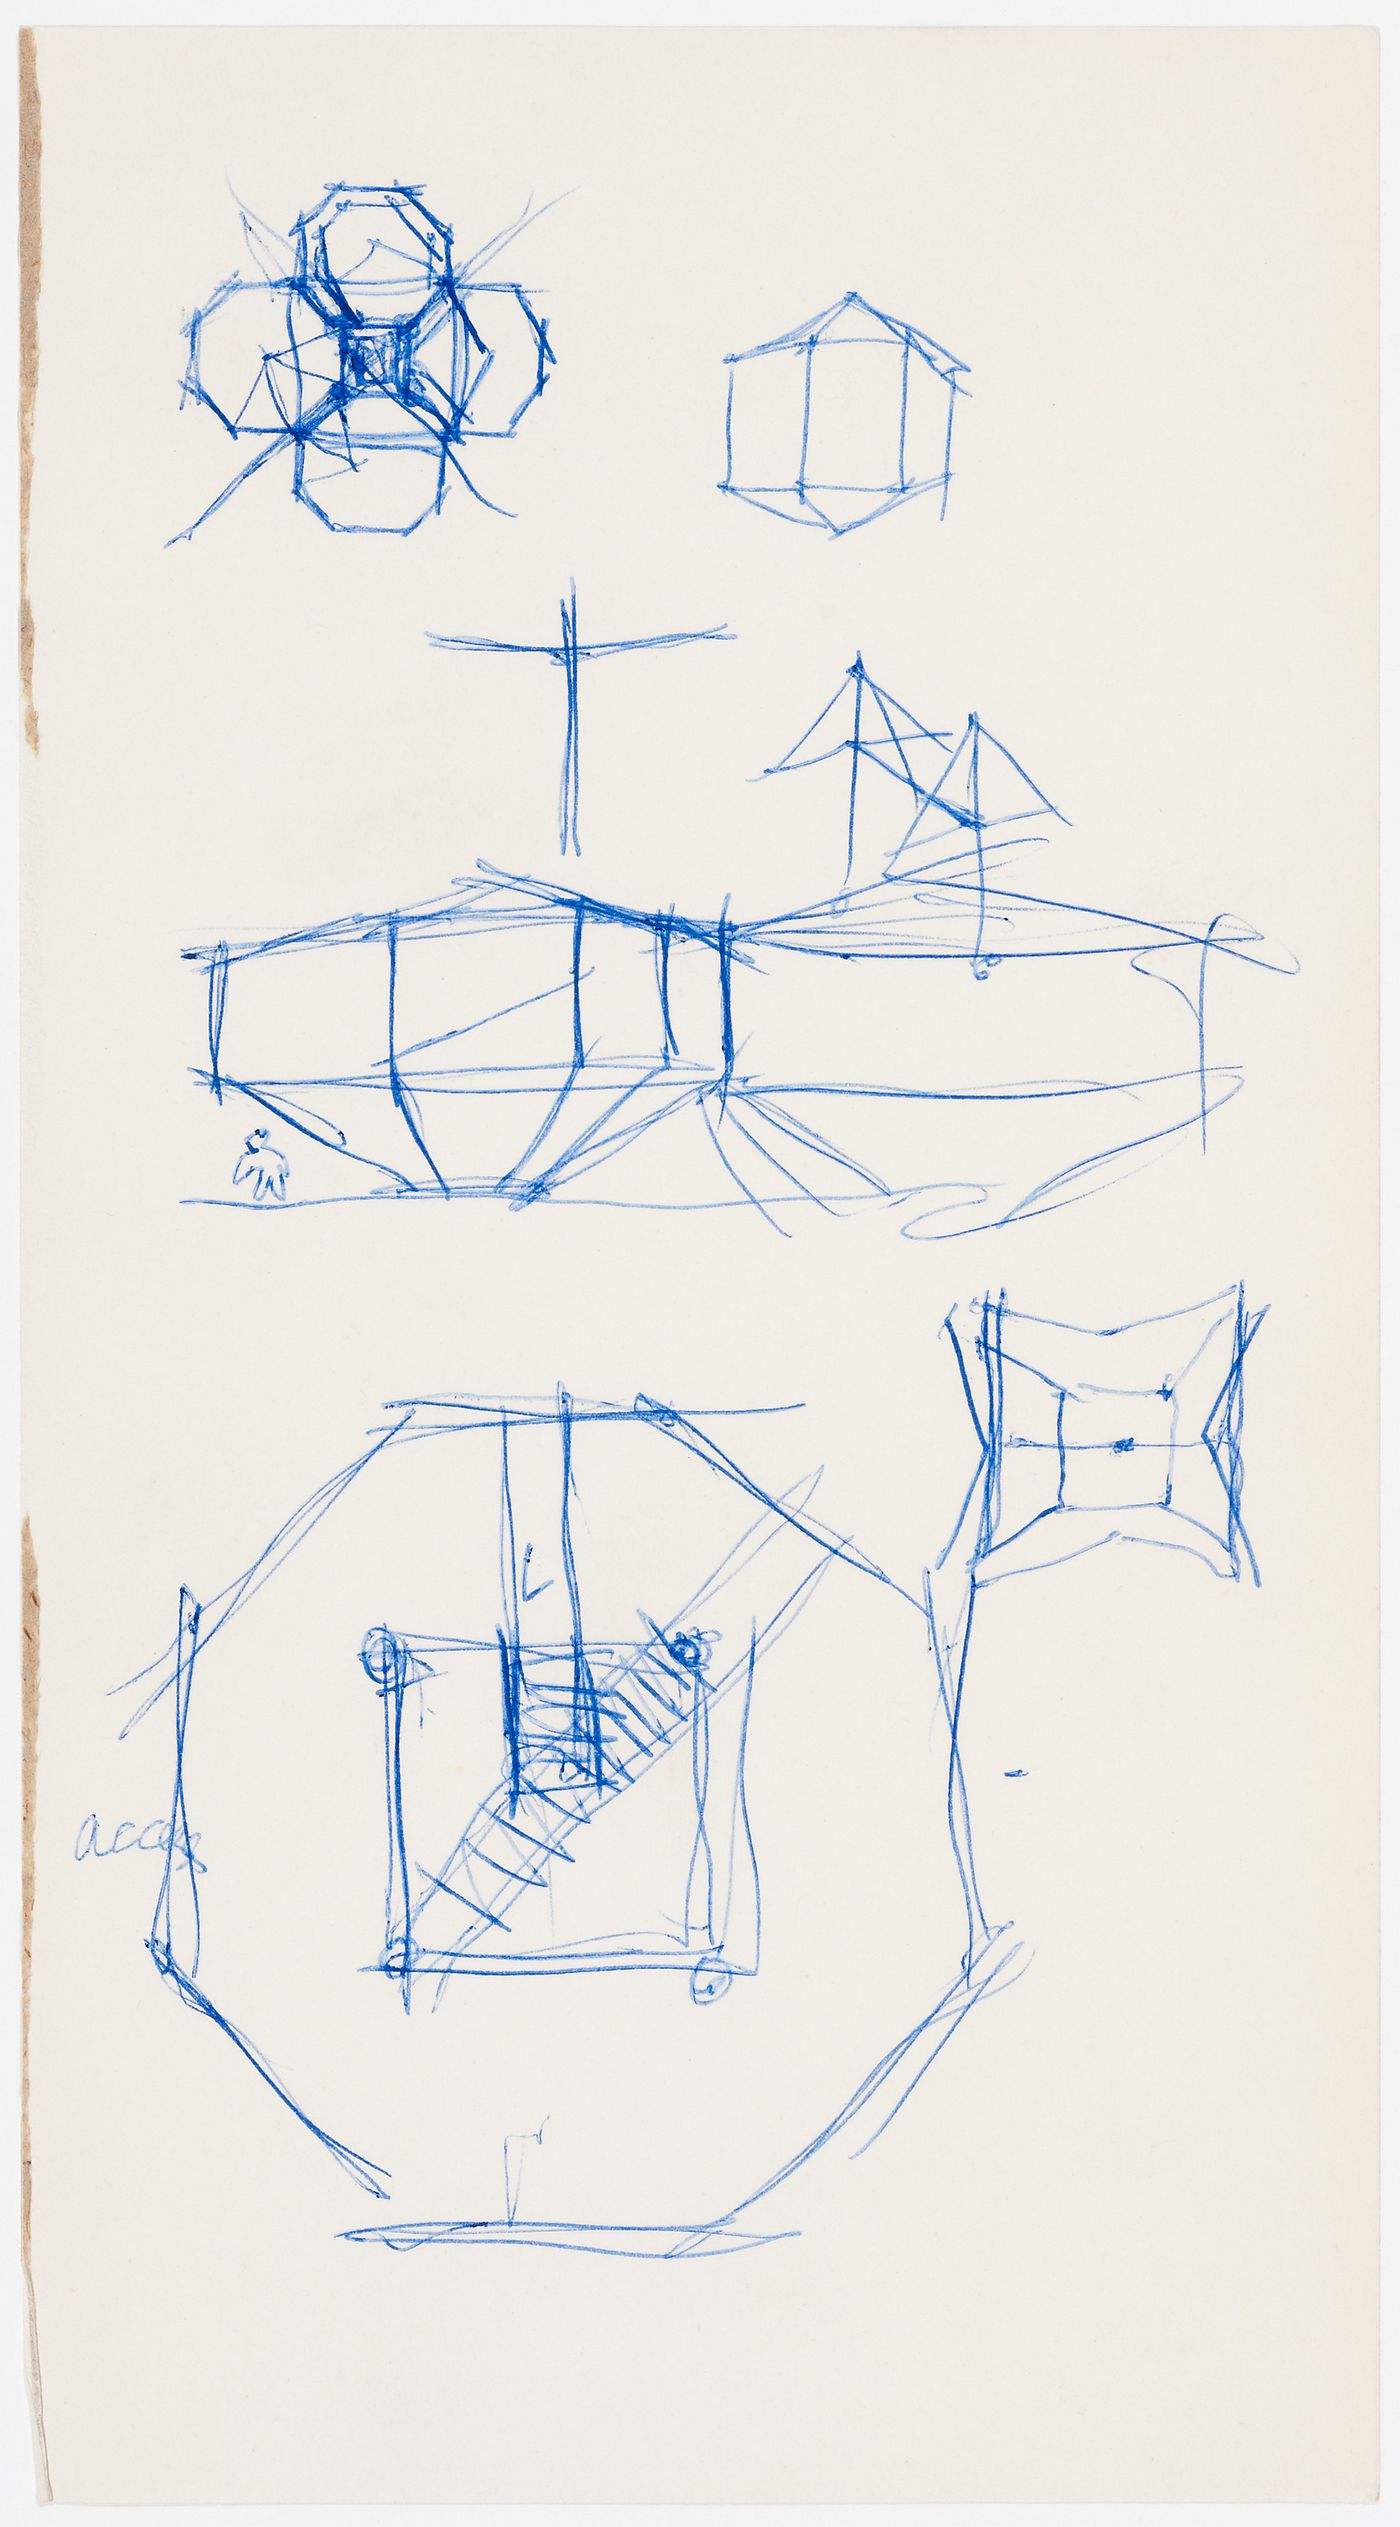 Conceptual sketches for the Aviary at the London Zoo: plans and elevations